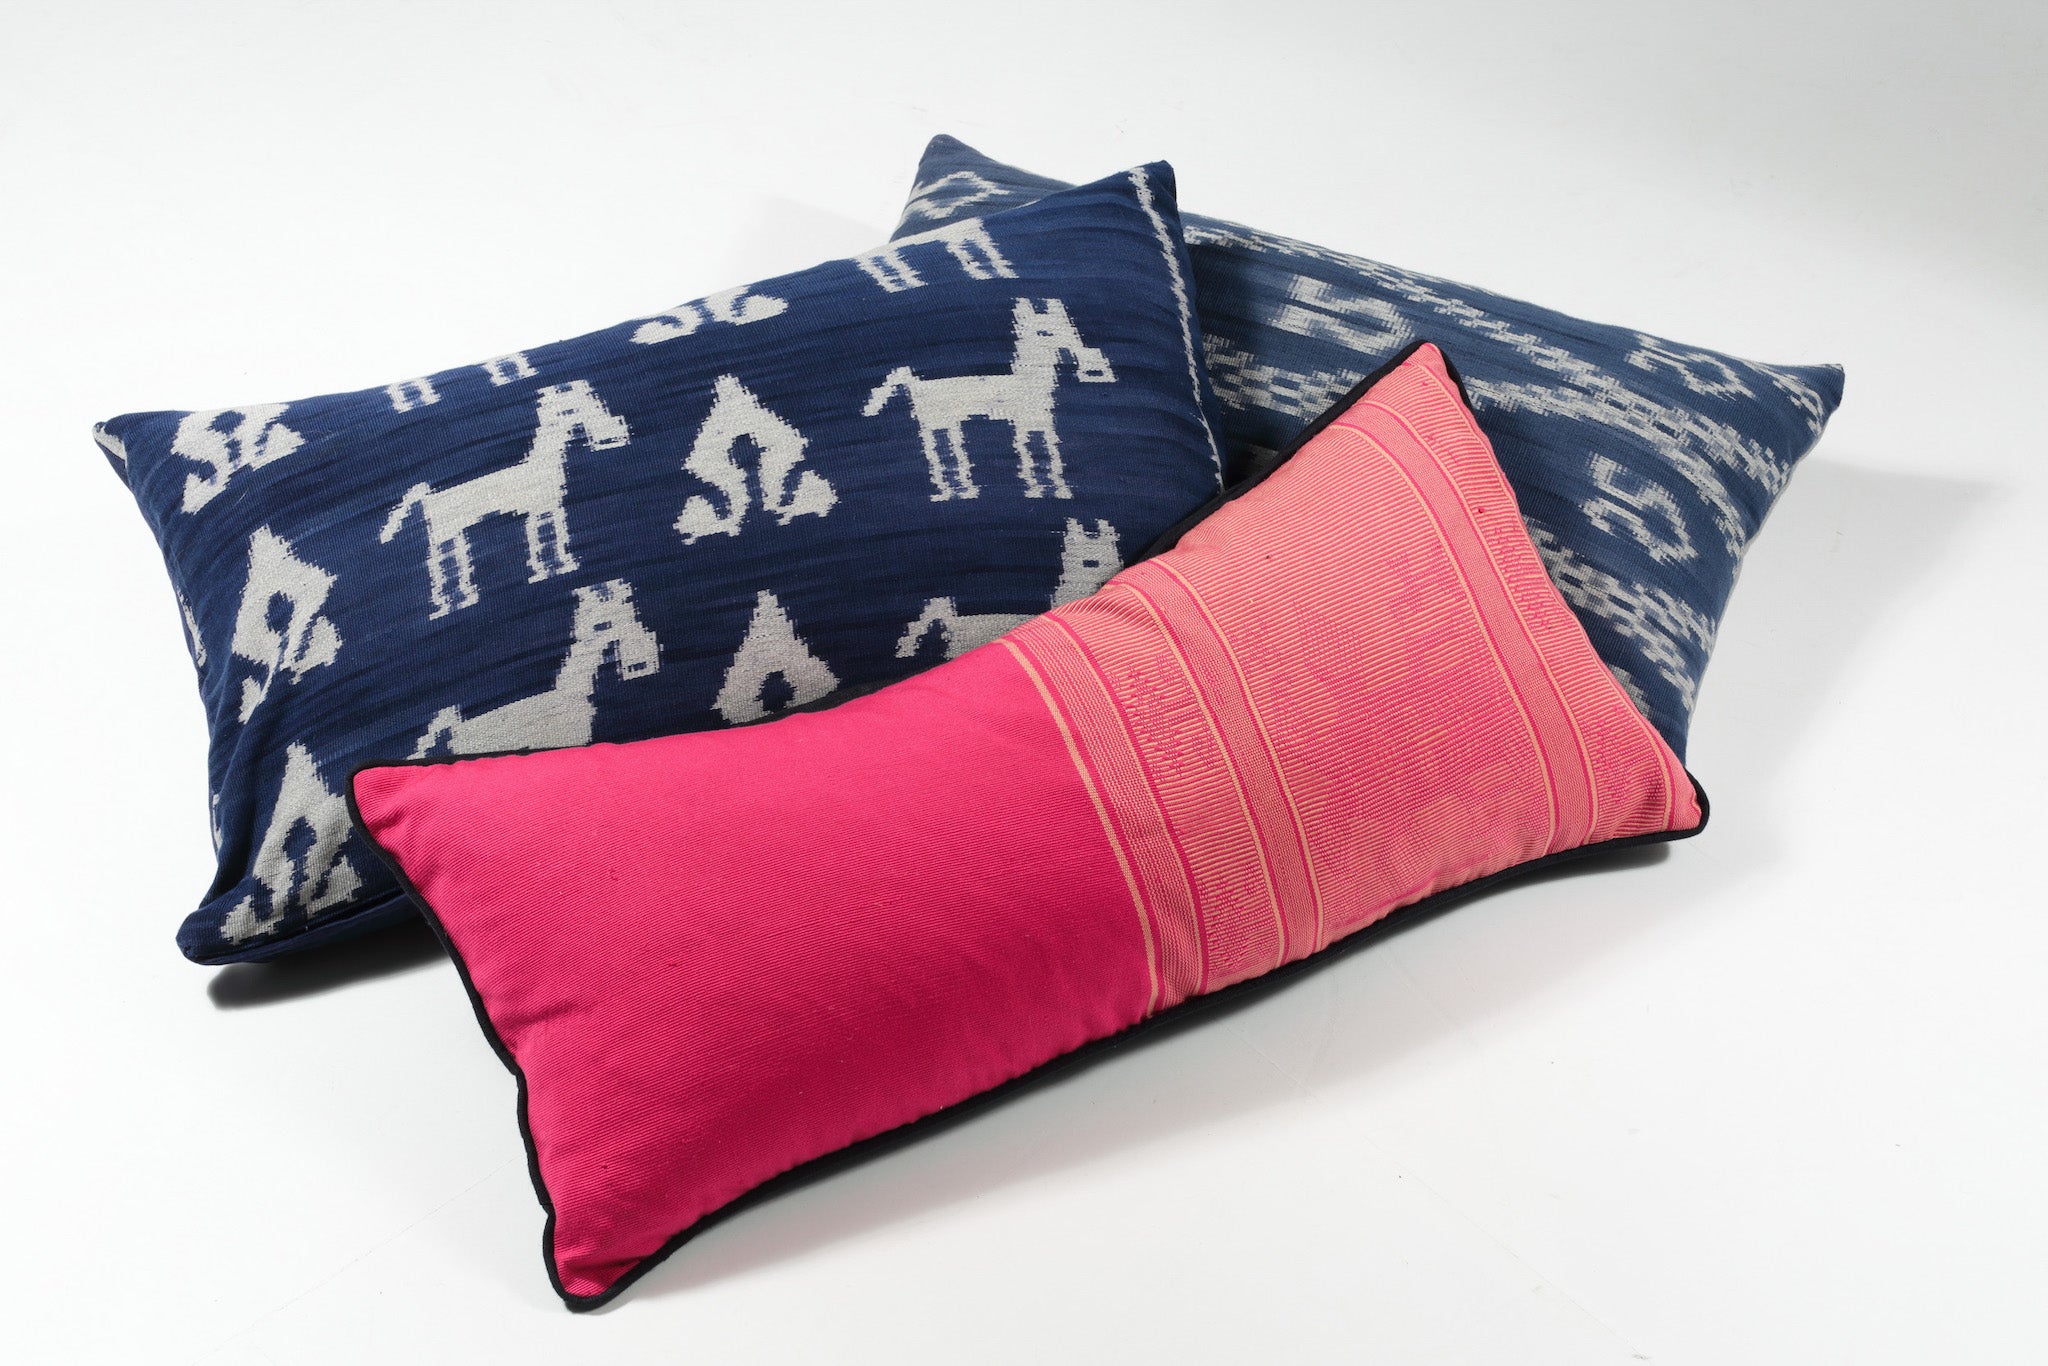 Unique Ikat and Hand Embroidered Scatter Rectangle Cushions in Pink, Navy Blue with Animal Motif